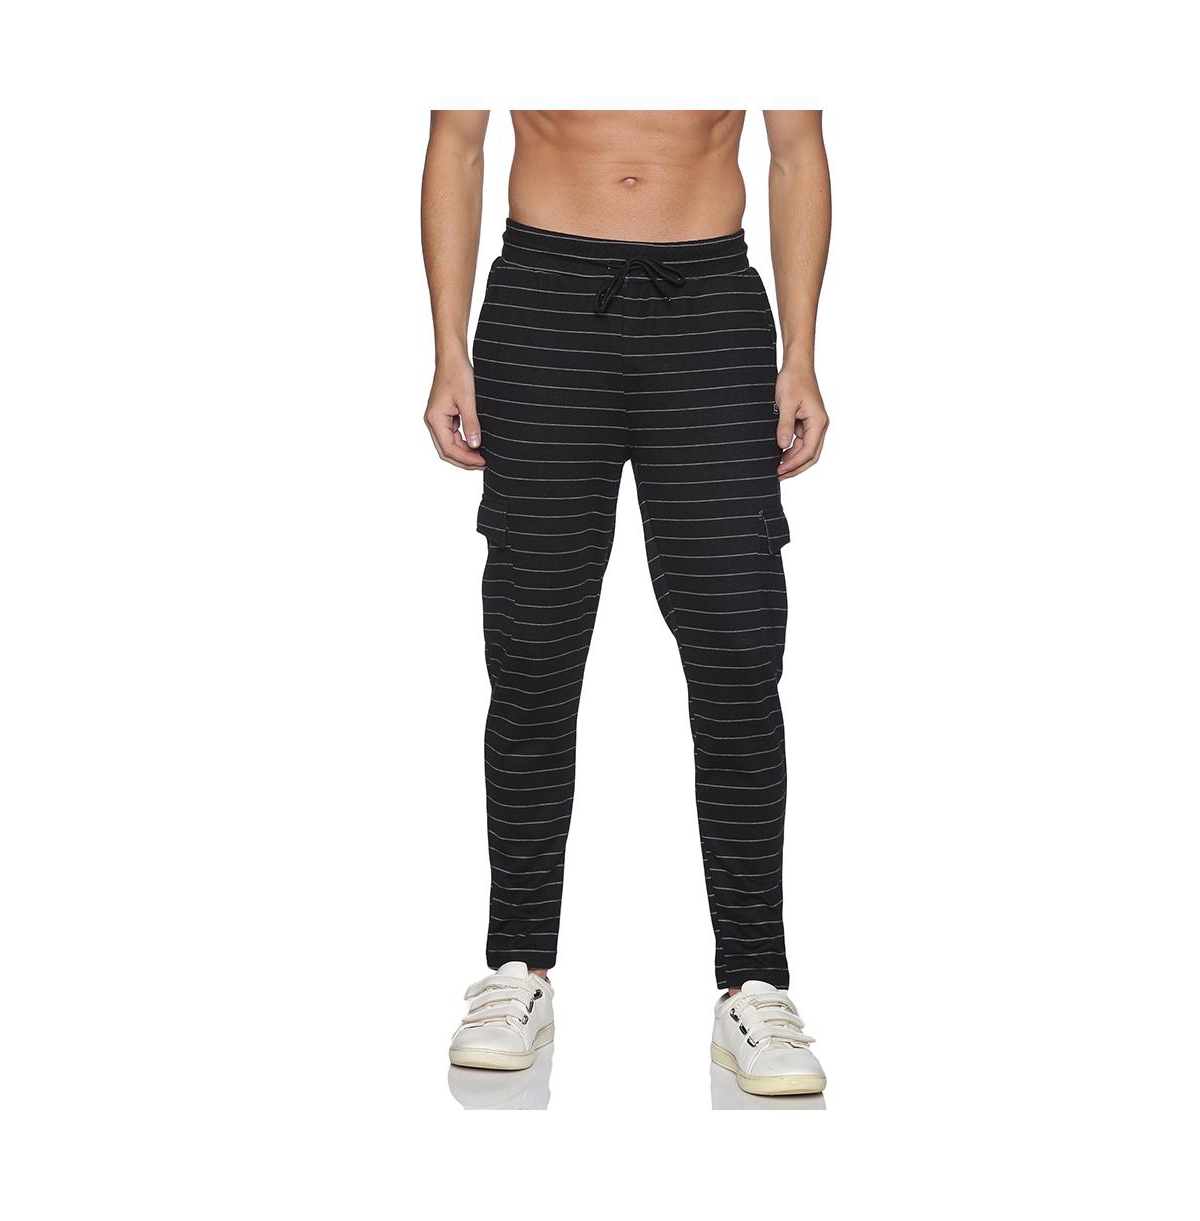 Campus Sutra Men's Black Horizontal Striped Casual Joggers In Jet Black